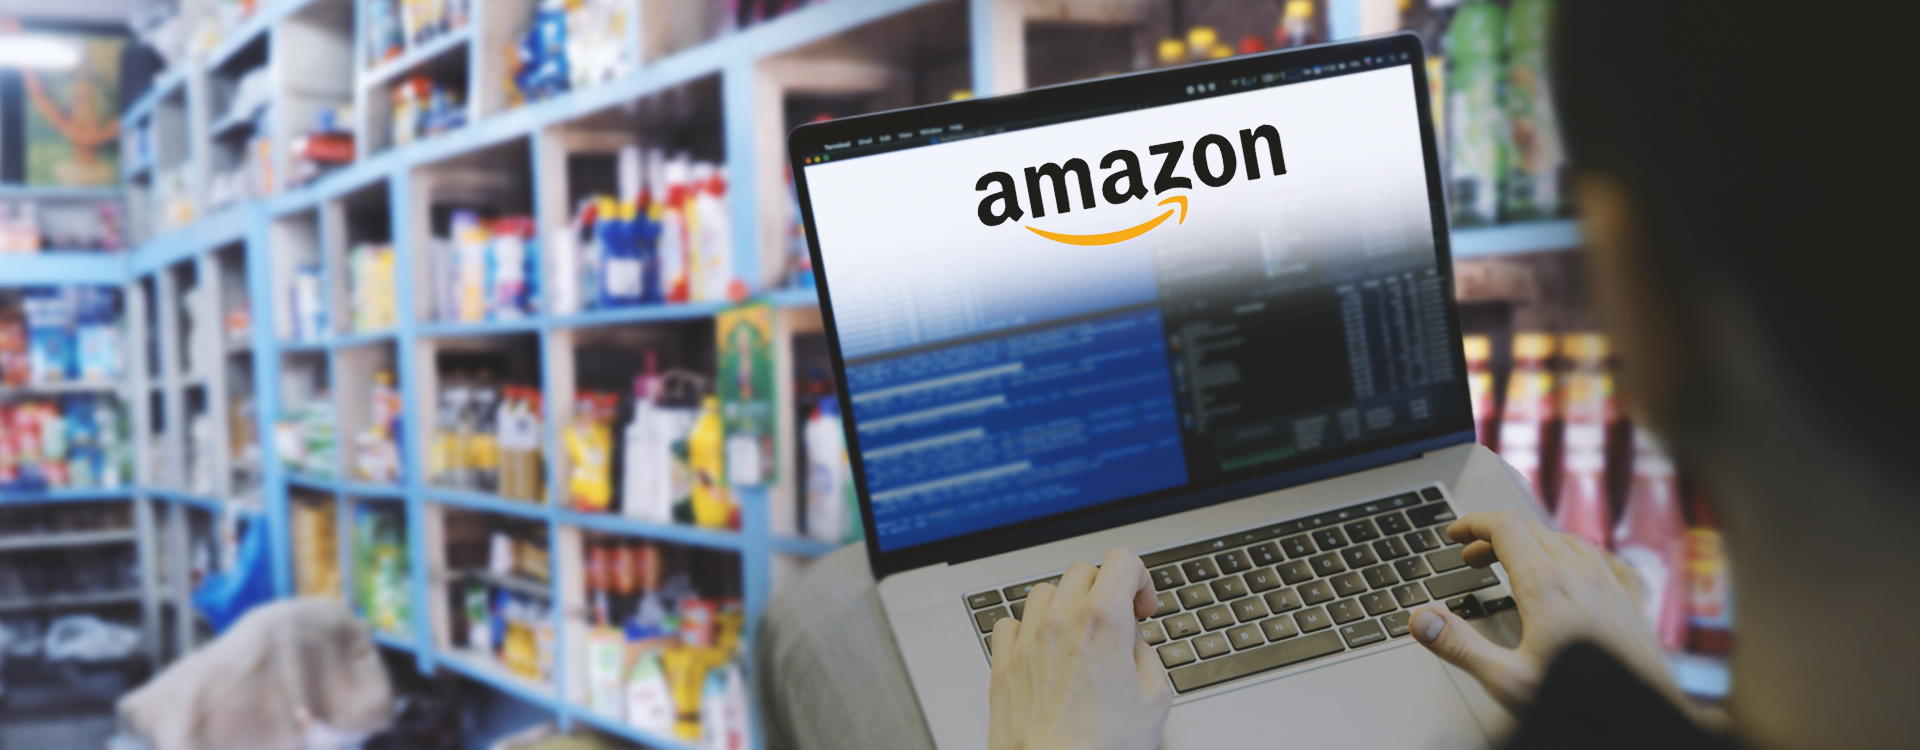 Amazon is entering the Indian retail market with Kirana stores and has acquired retail tech start-up Perpule